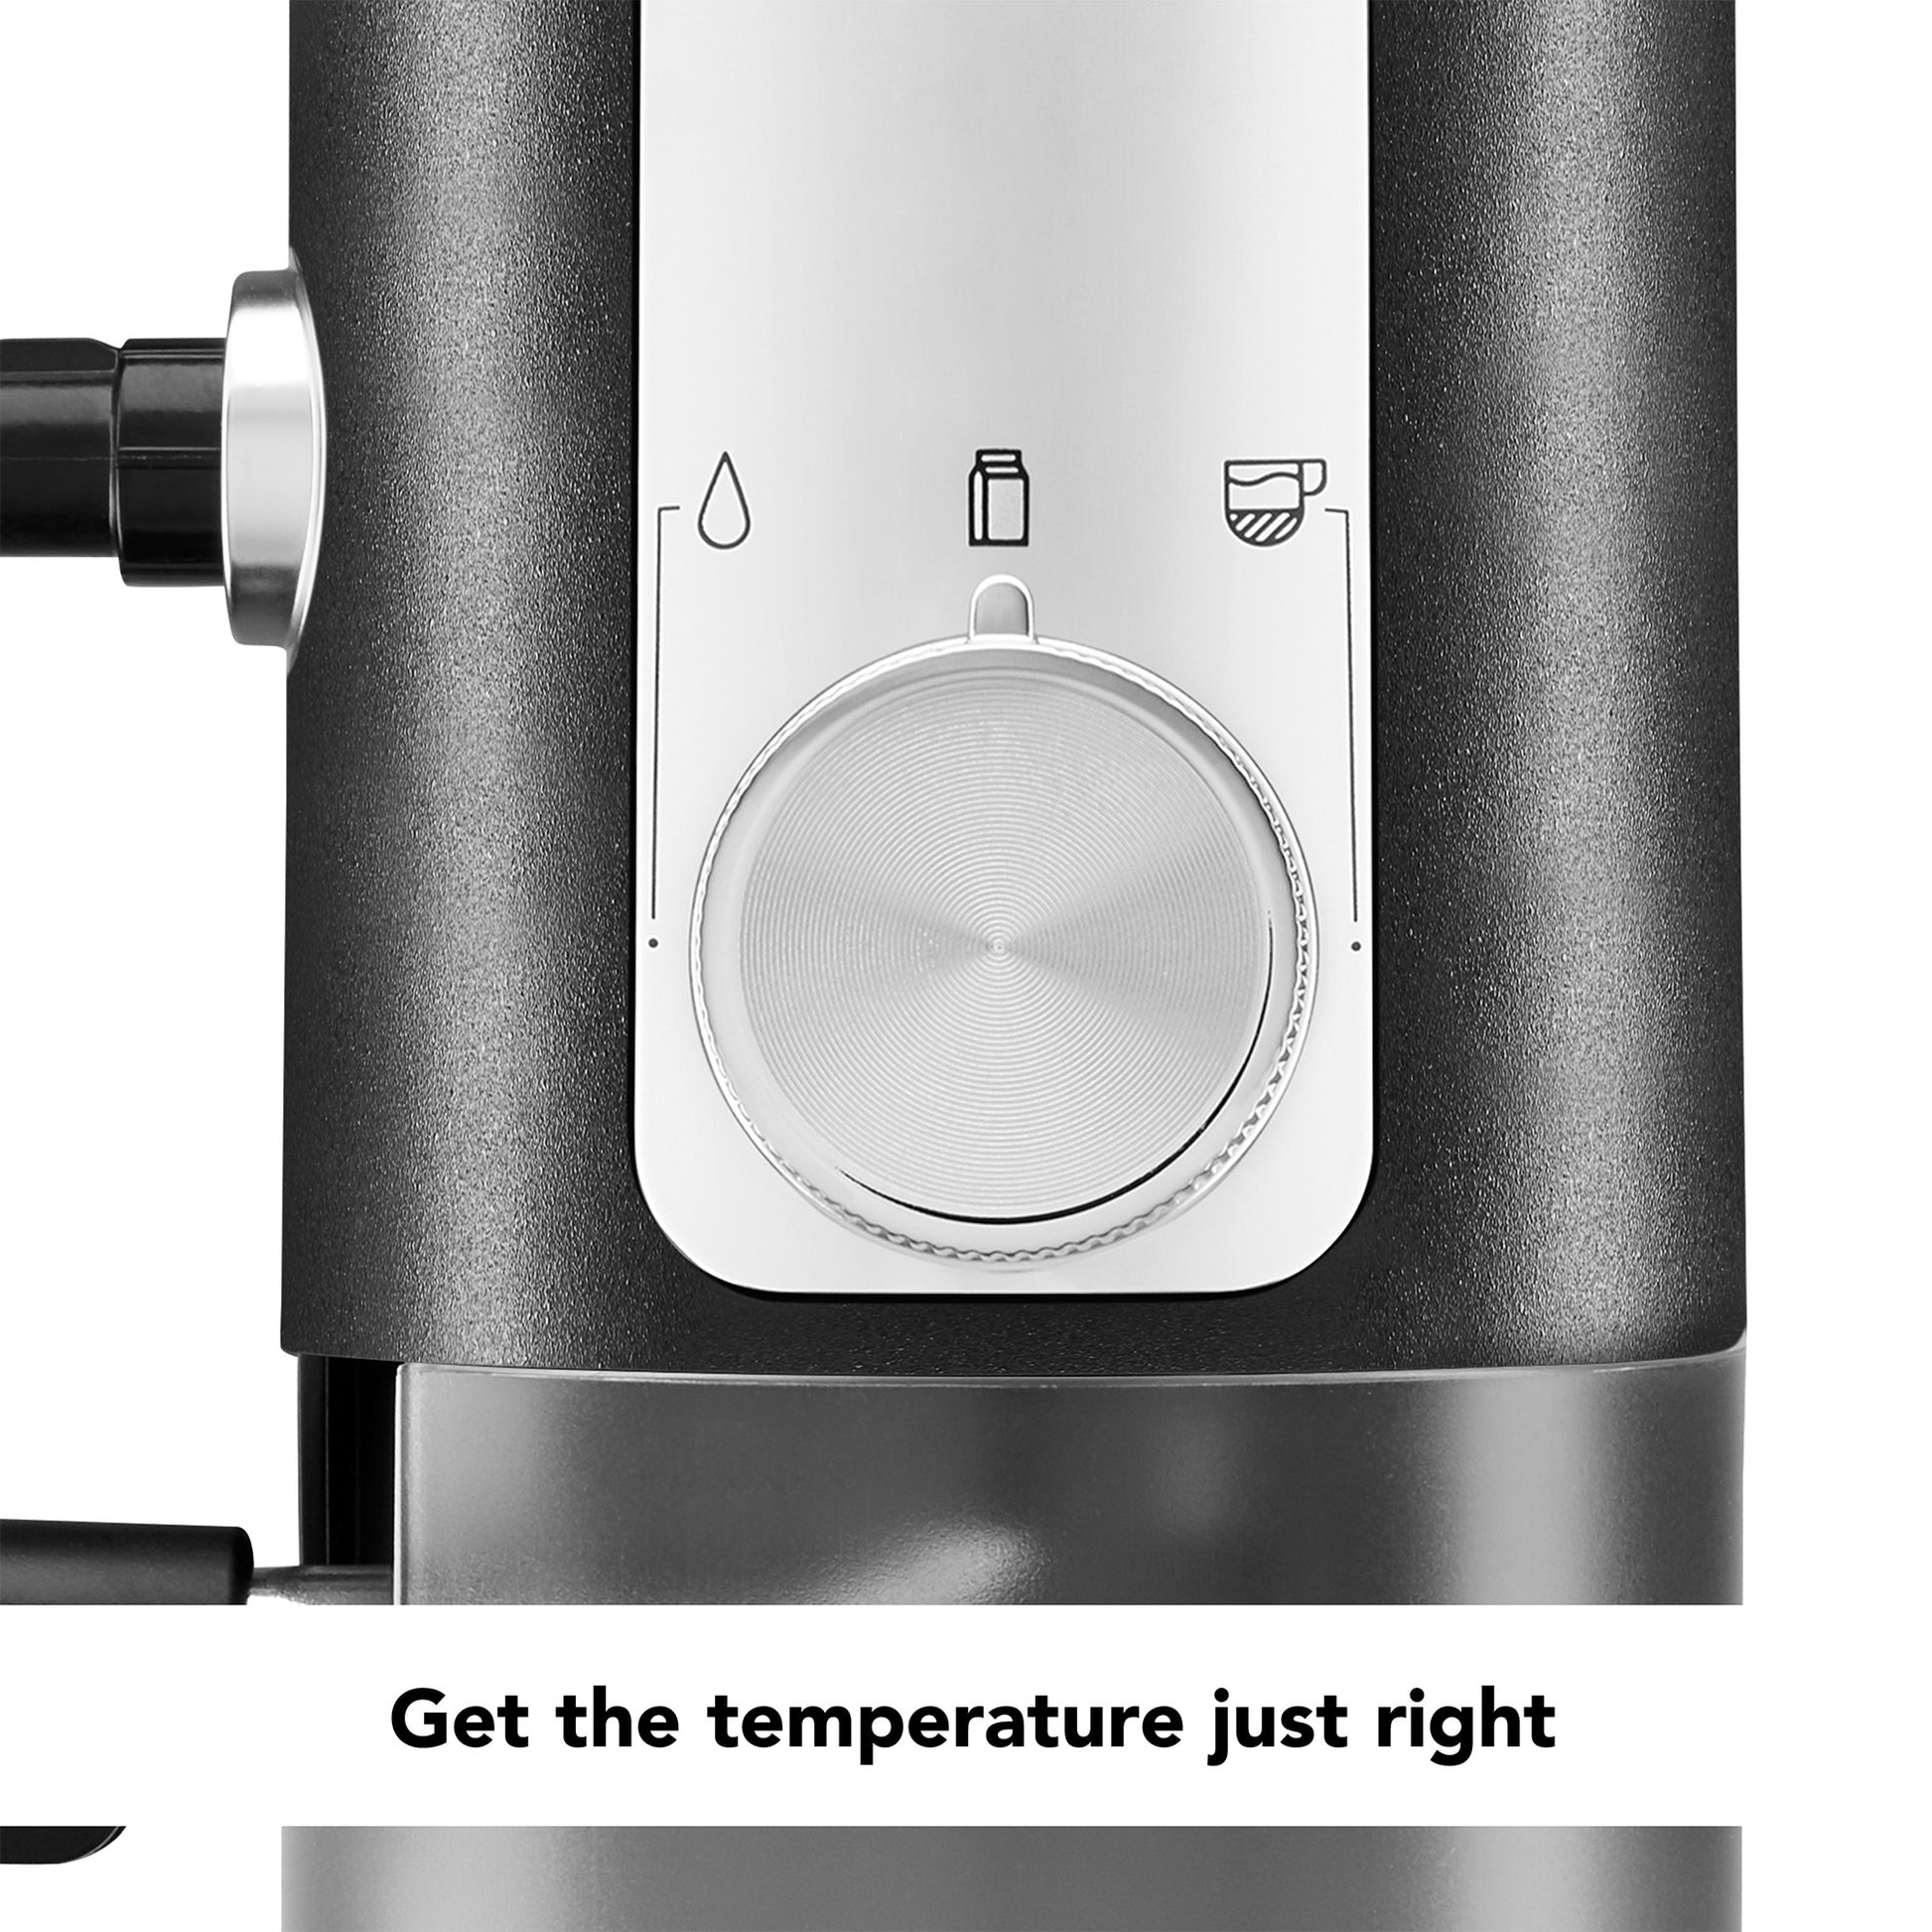 Best Automatic Milk Frothers to Make Latte Like a Pro